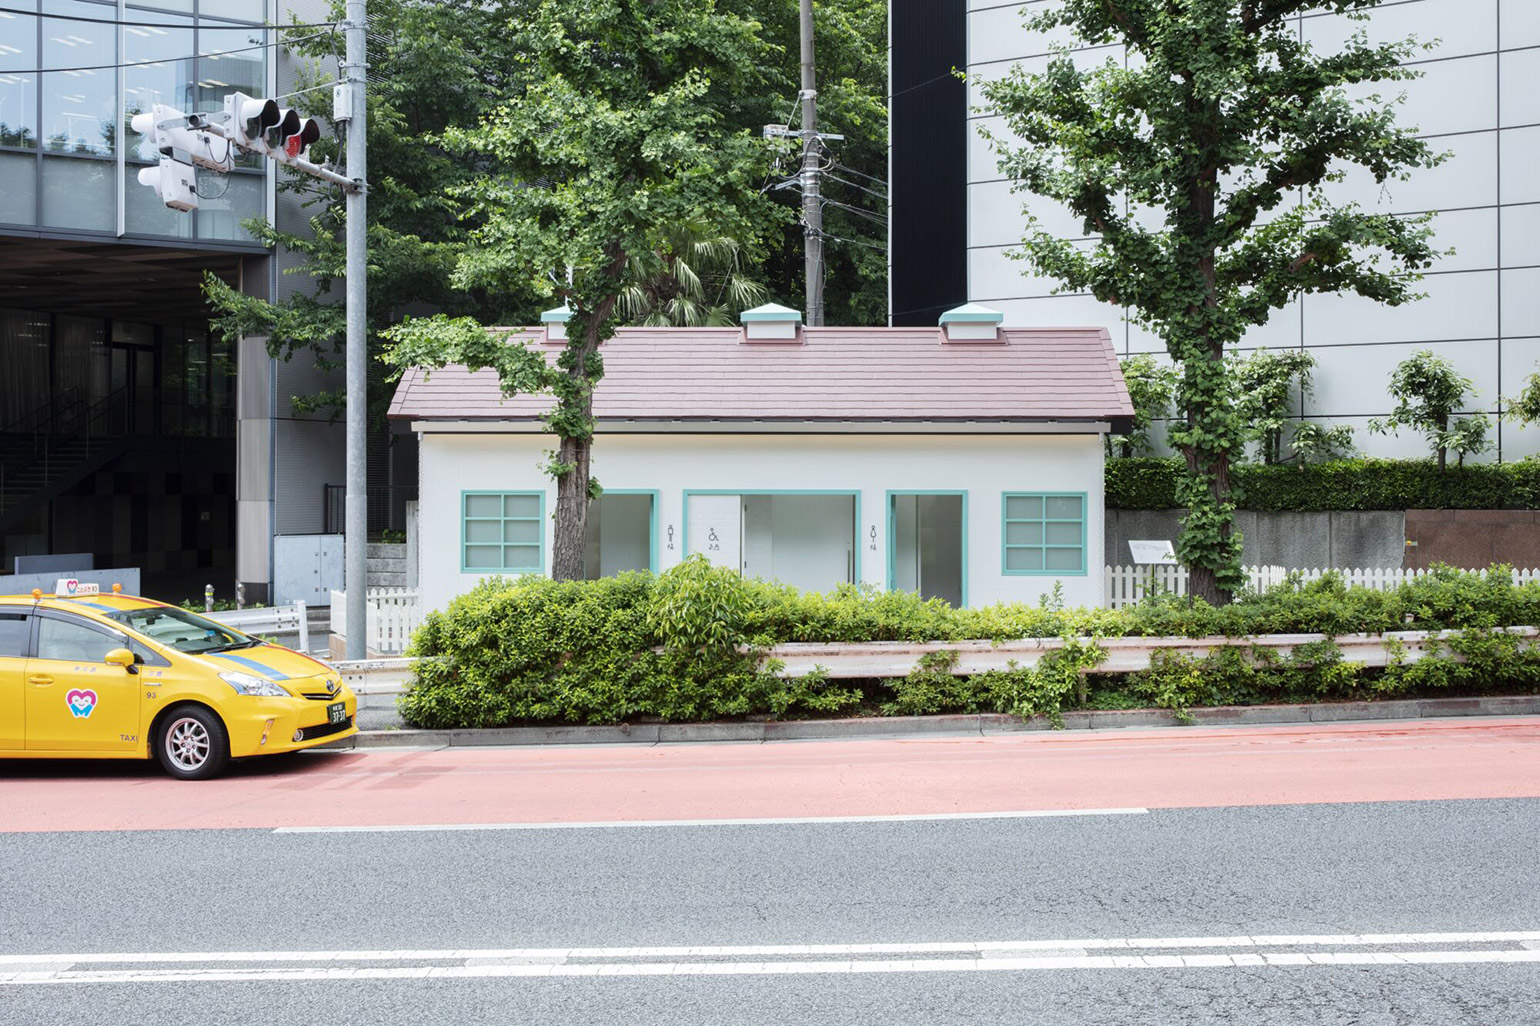 “The House” — NIGO Designed Eighth Public Restroom for The Tokyo Toilet Project